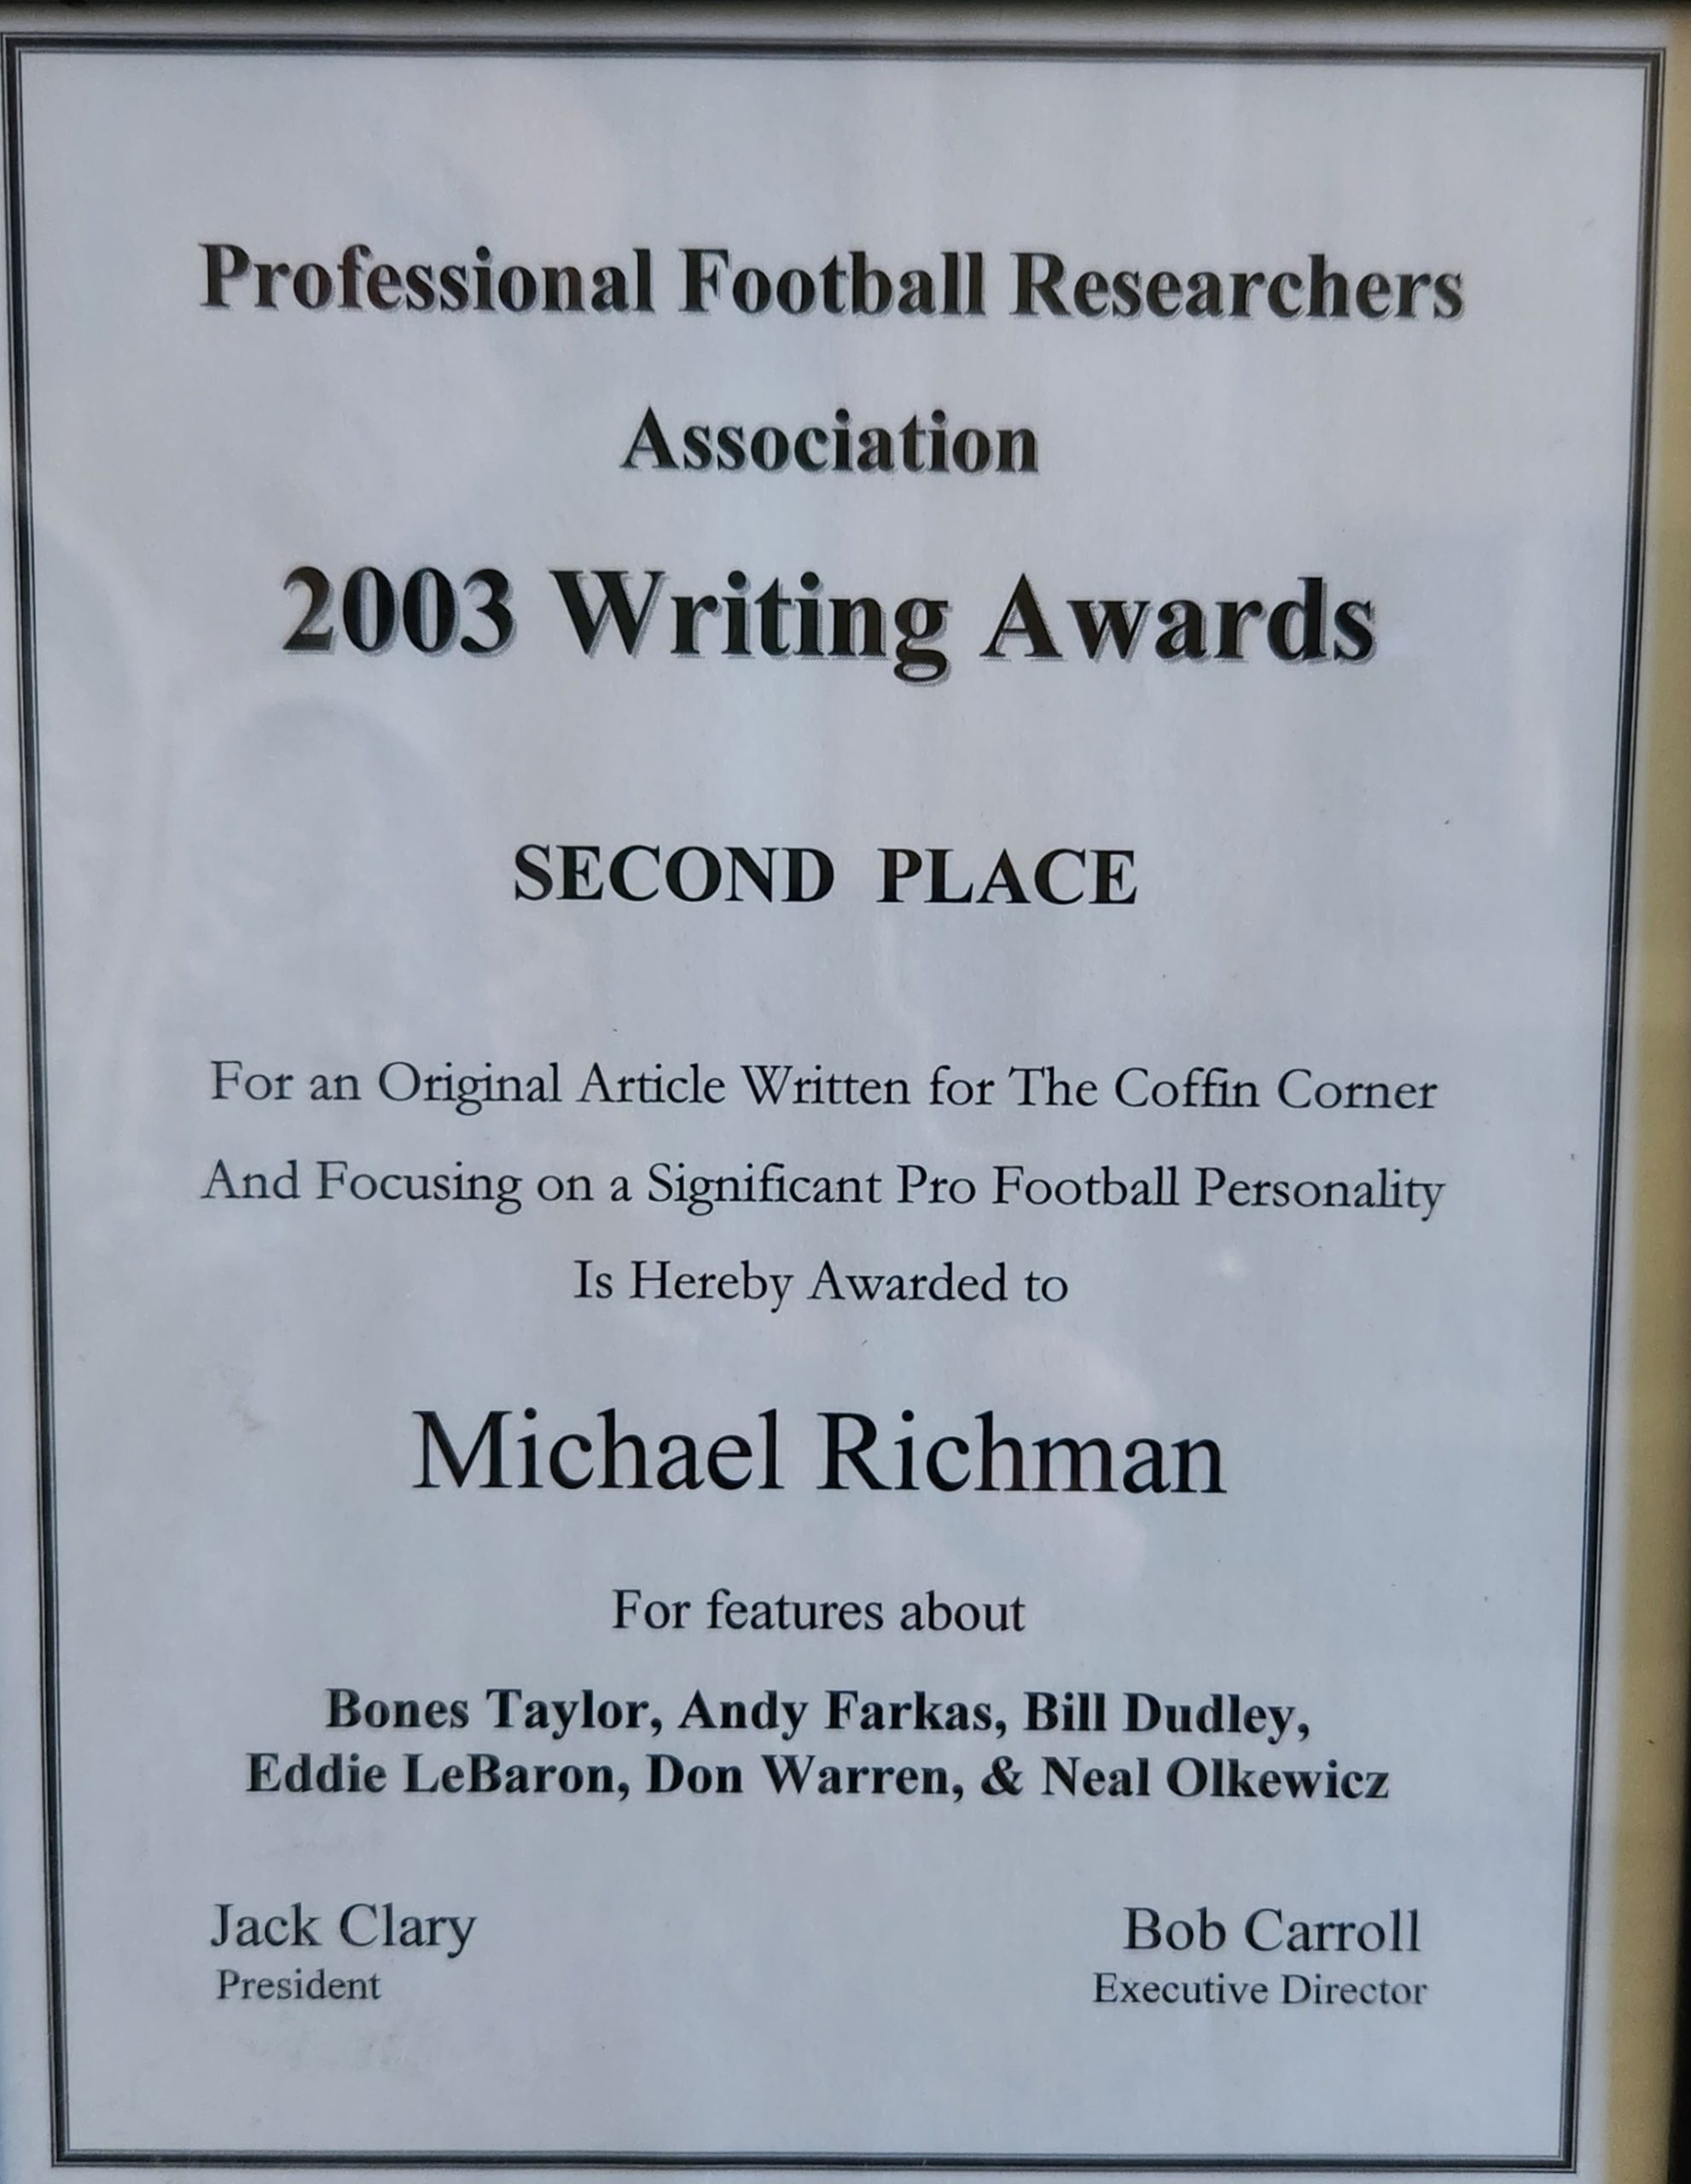 In 2003, the Pro Football Researchers Association honored Mike Richman with an award for his articles in the PFRA newsletter on six former Redskins players: Neal Olkewicz, Bones Taylor, Andy Farkas, Bill Dudley, Eddie LeBaron and Don Warren.